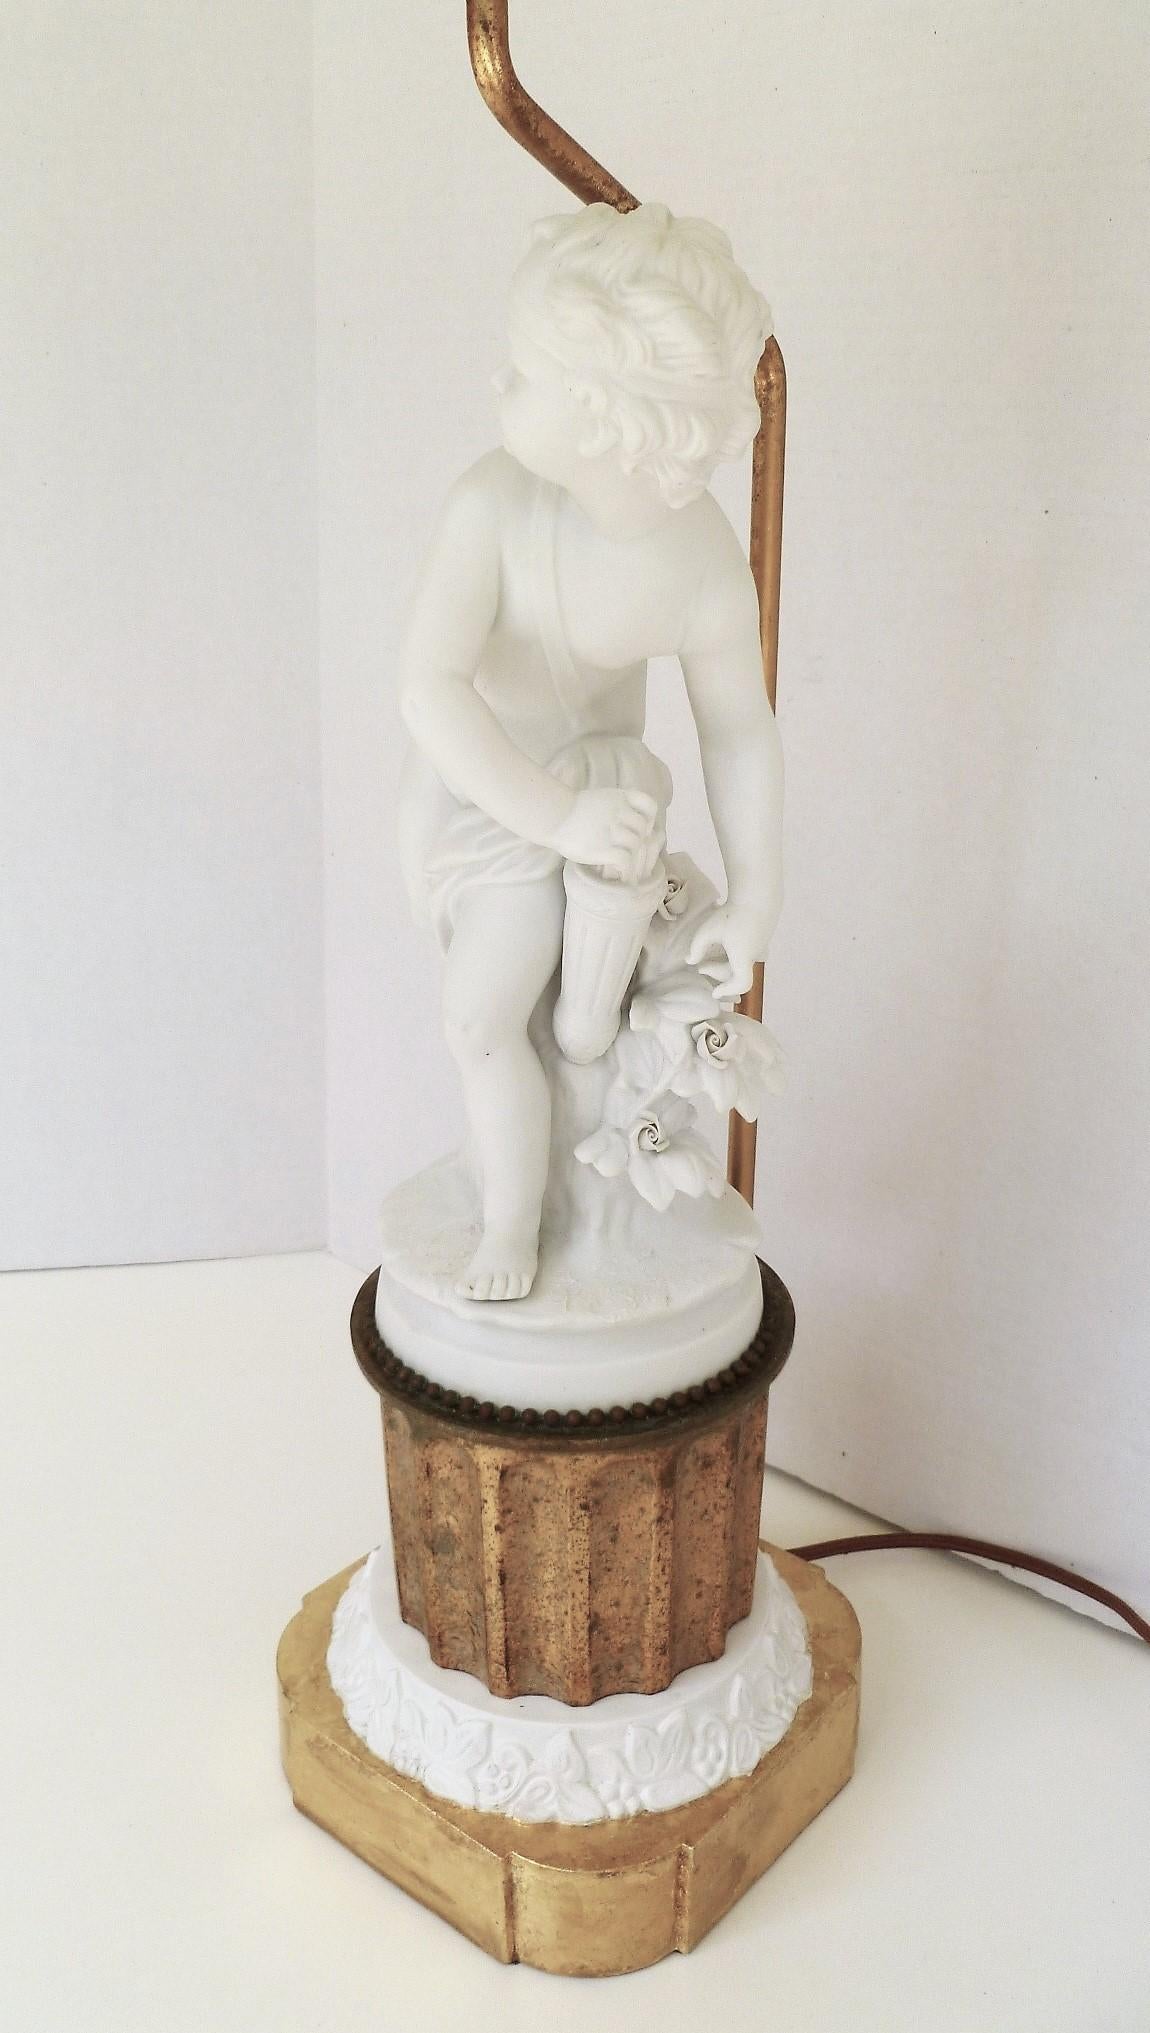 Early 20th Century Antique Parian Eros on Gilt Pedestal French Table Lamp